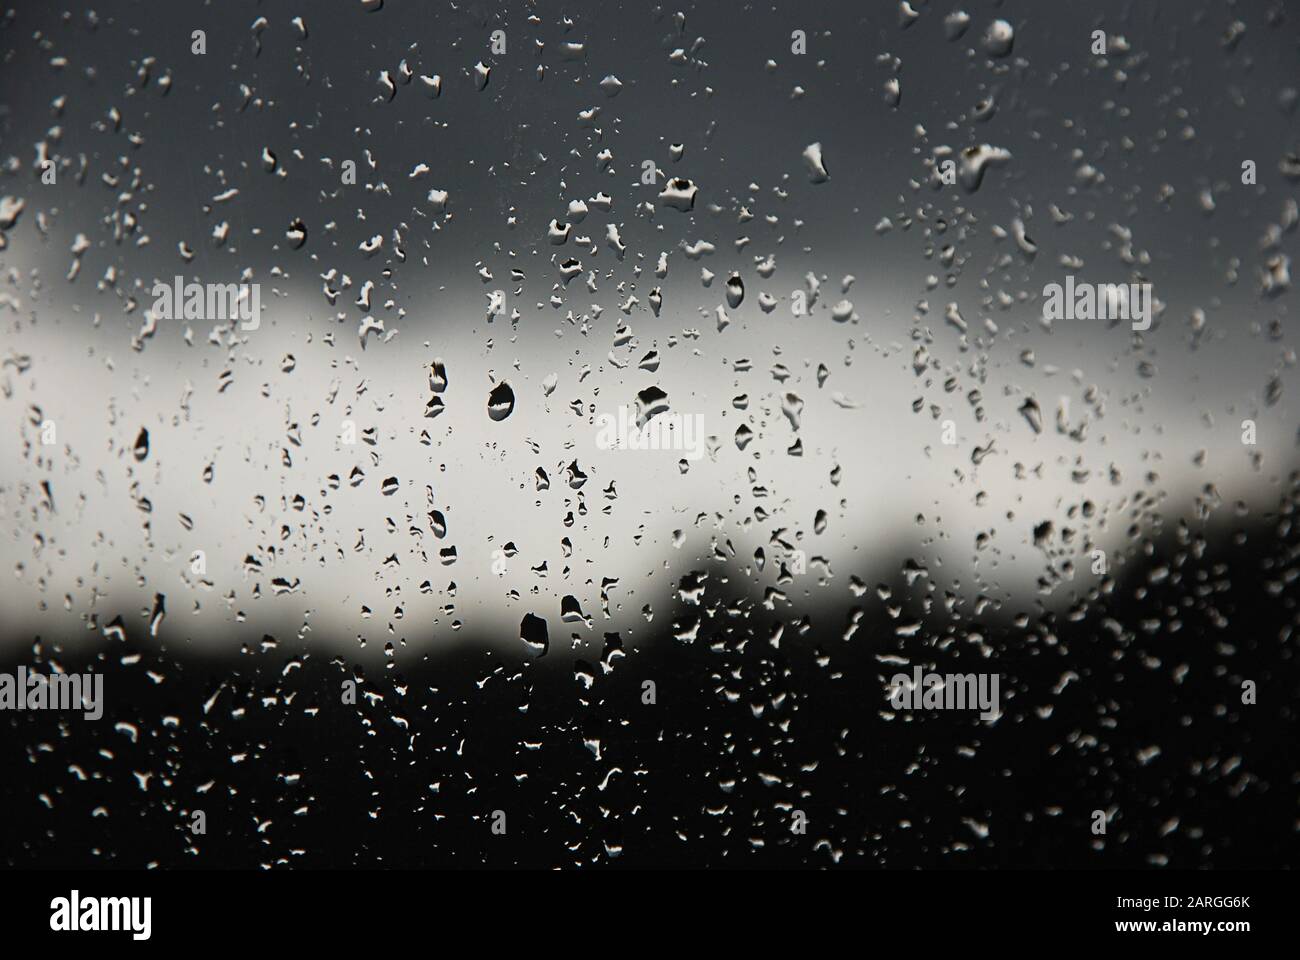 Raindrops on the window pane. Black, gray, white gradient on blurry background. Cloudy rainy weather outside the window. Cooling, raining, bad weather Stock Photo